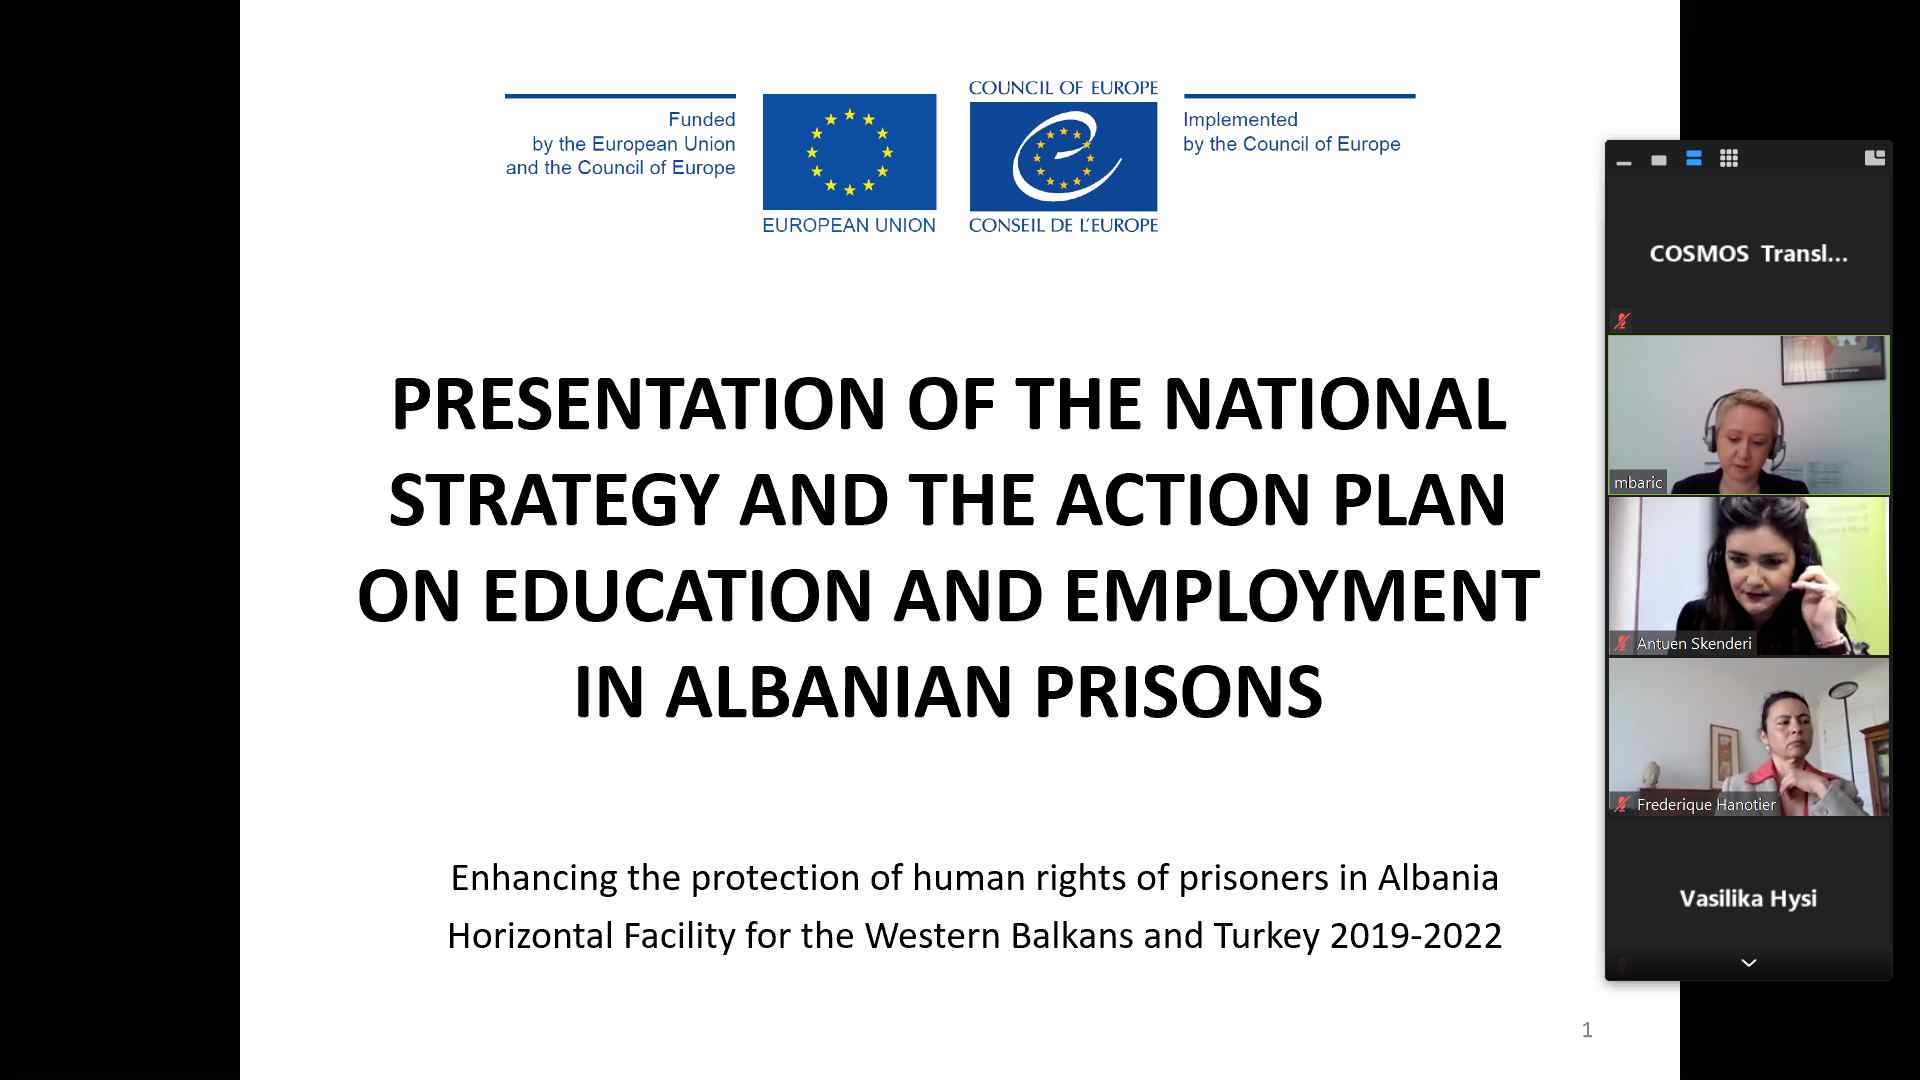 Open consultation on the Strategy and Action Plan on improving education and employment of Albanian prisoners